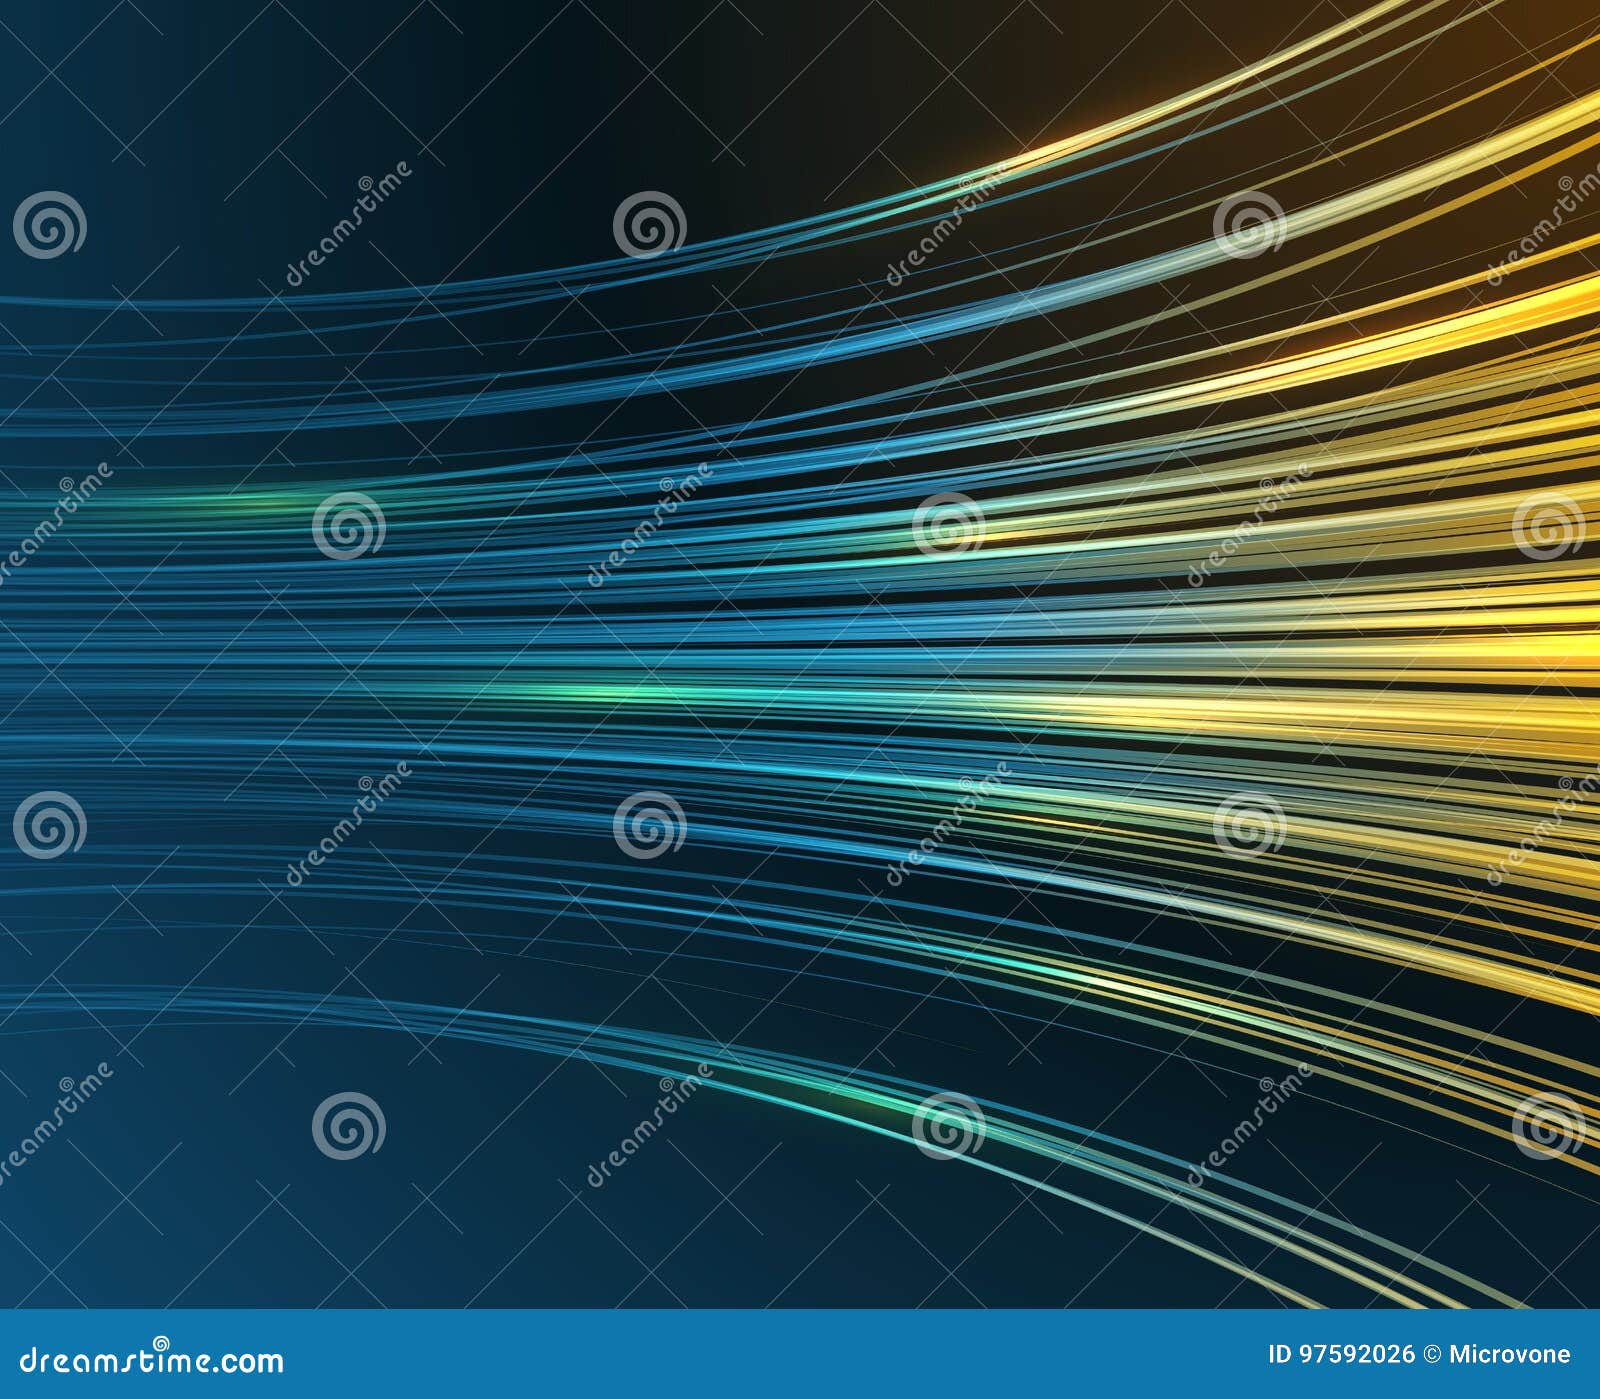 speed motion blue light curves abstract tech  graphic background